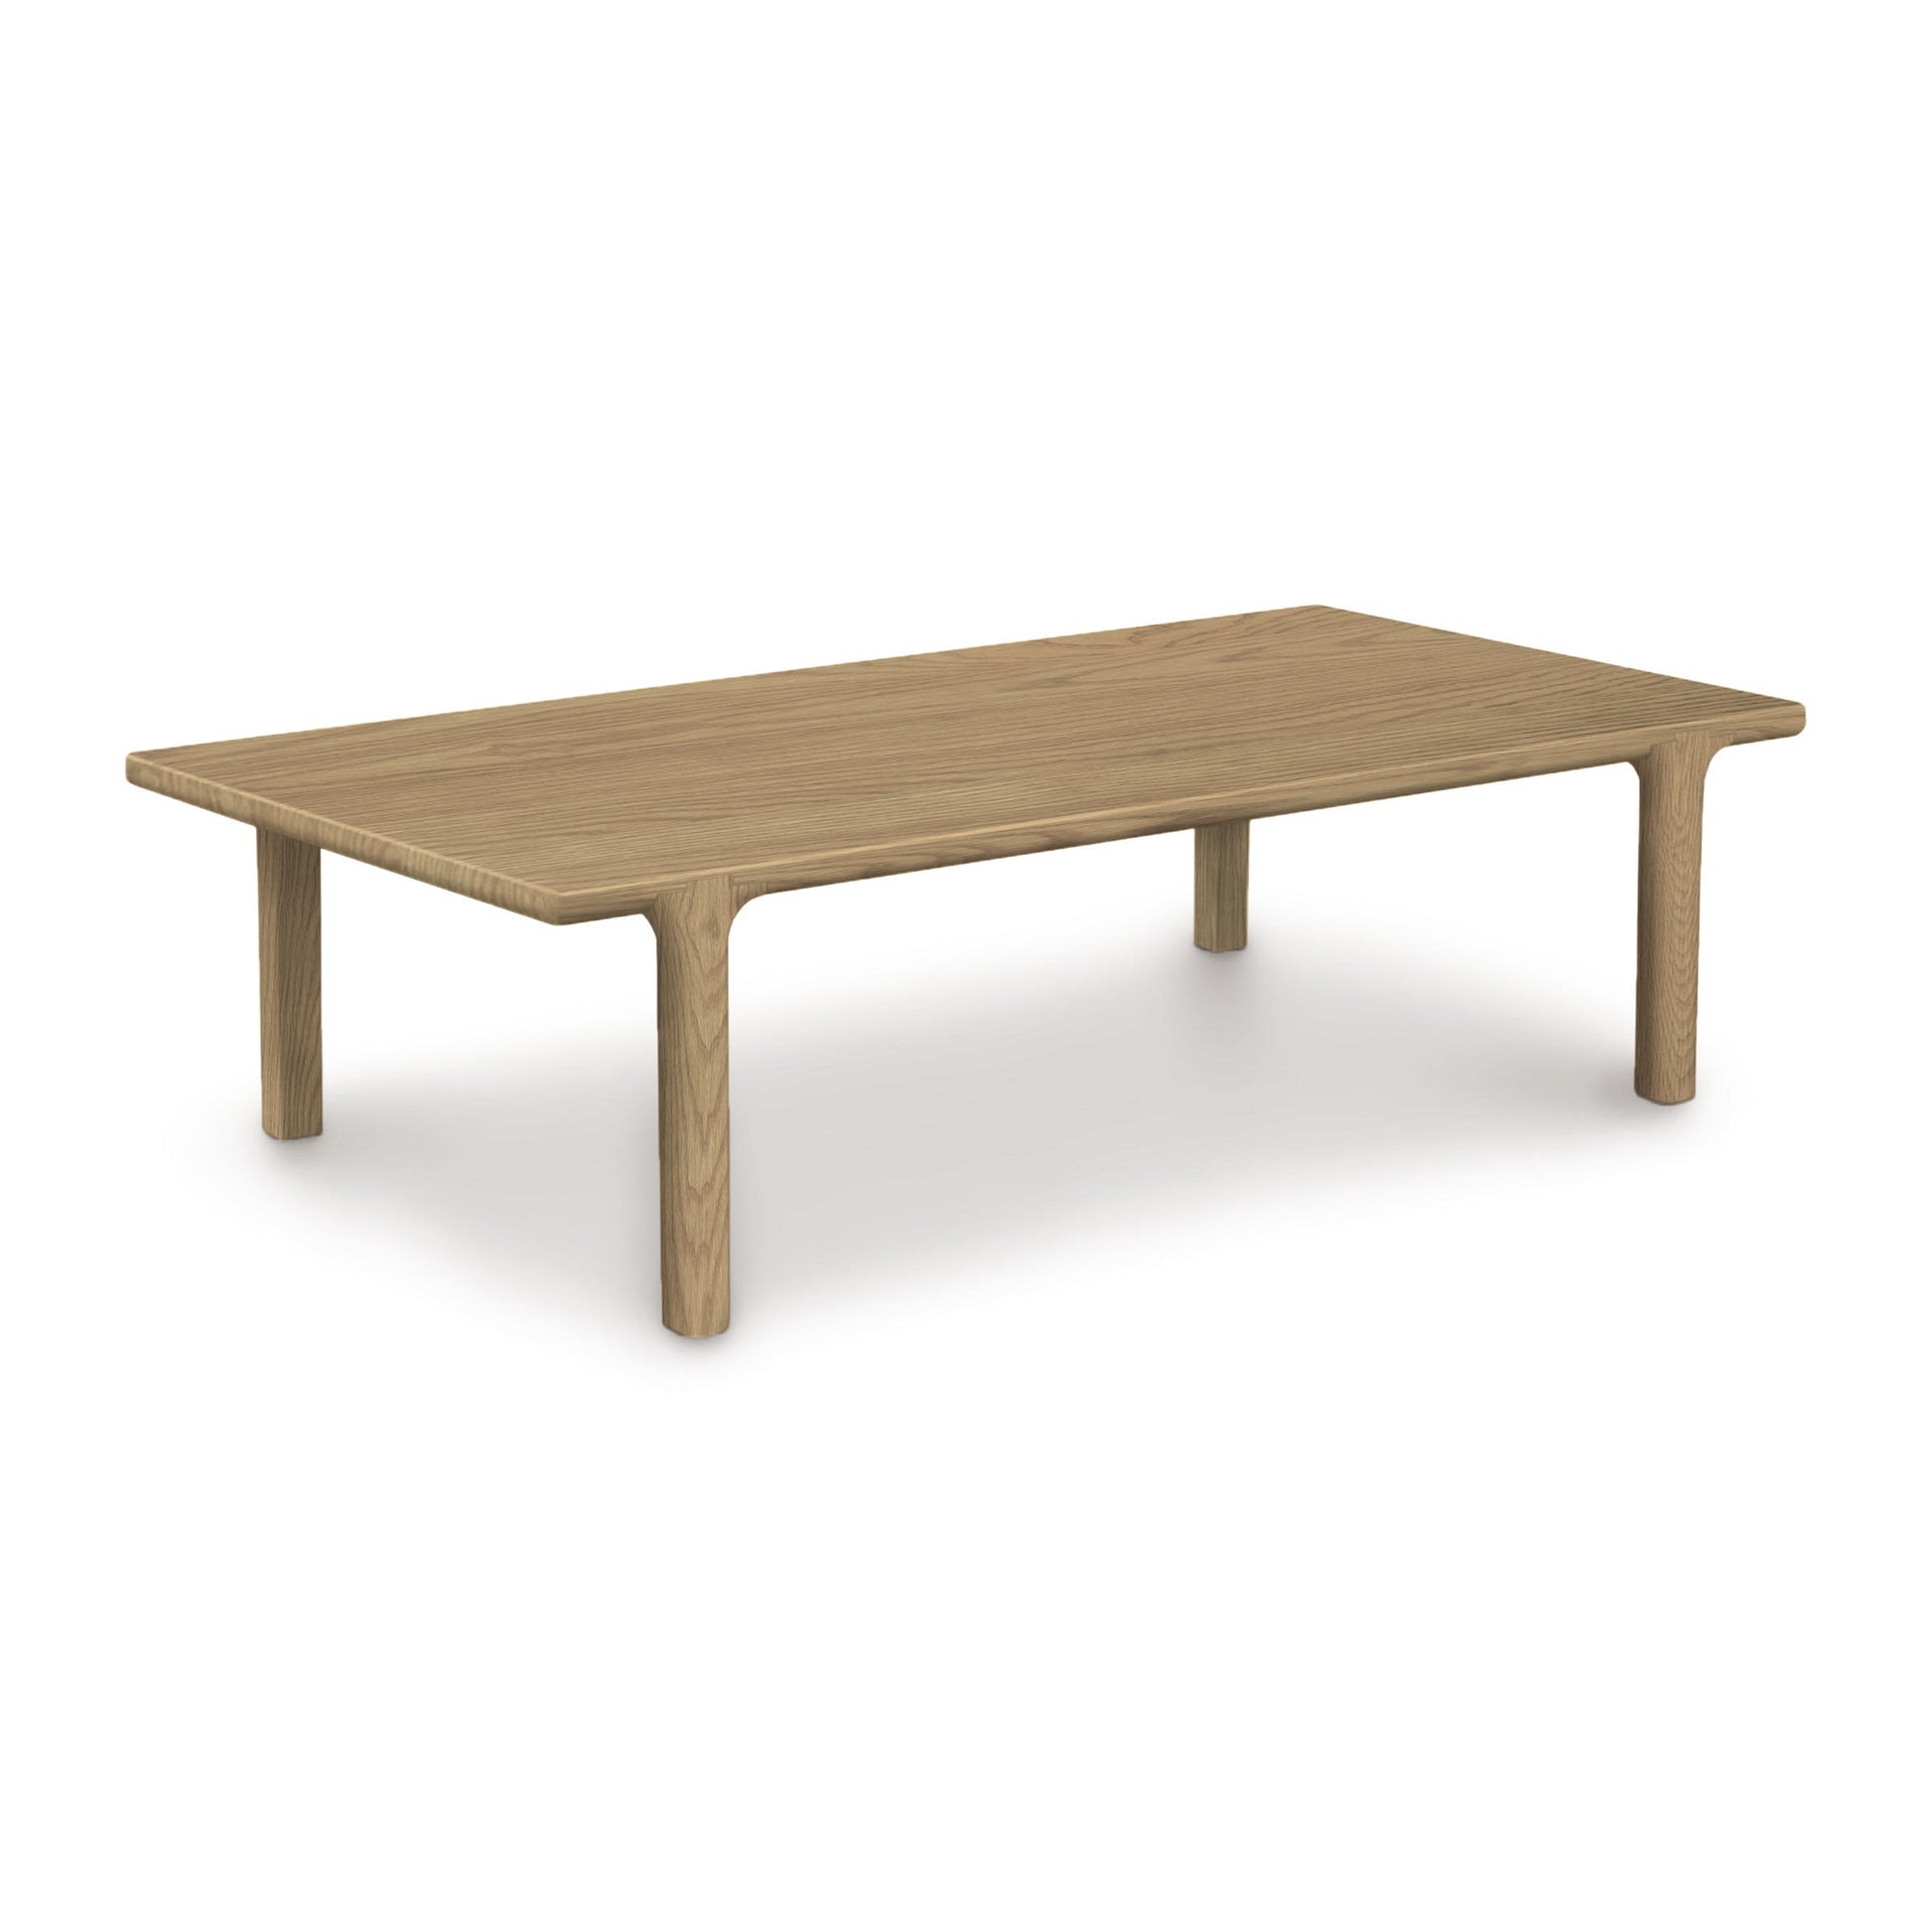 A Sierra Rectangular Coffee Table by Copeland Furniture, made of North American hardwood with four legs on a white background.